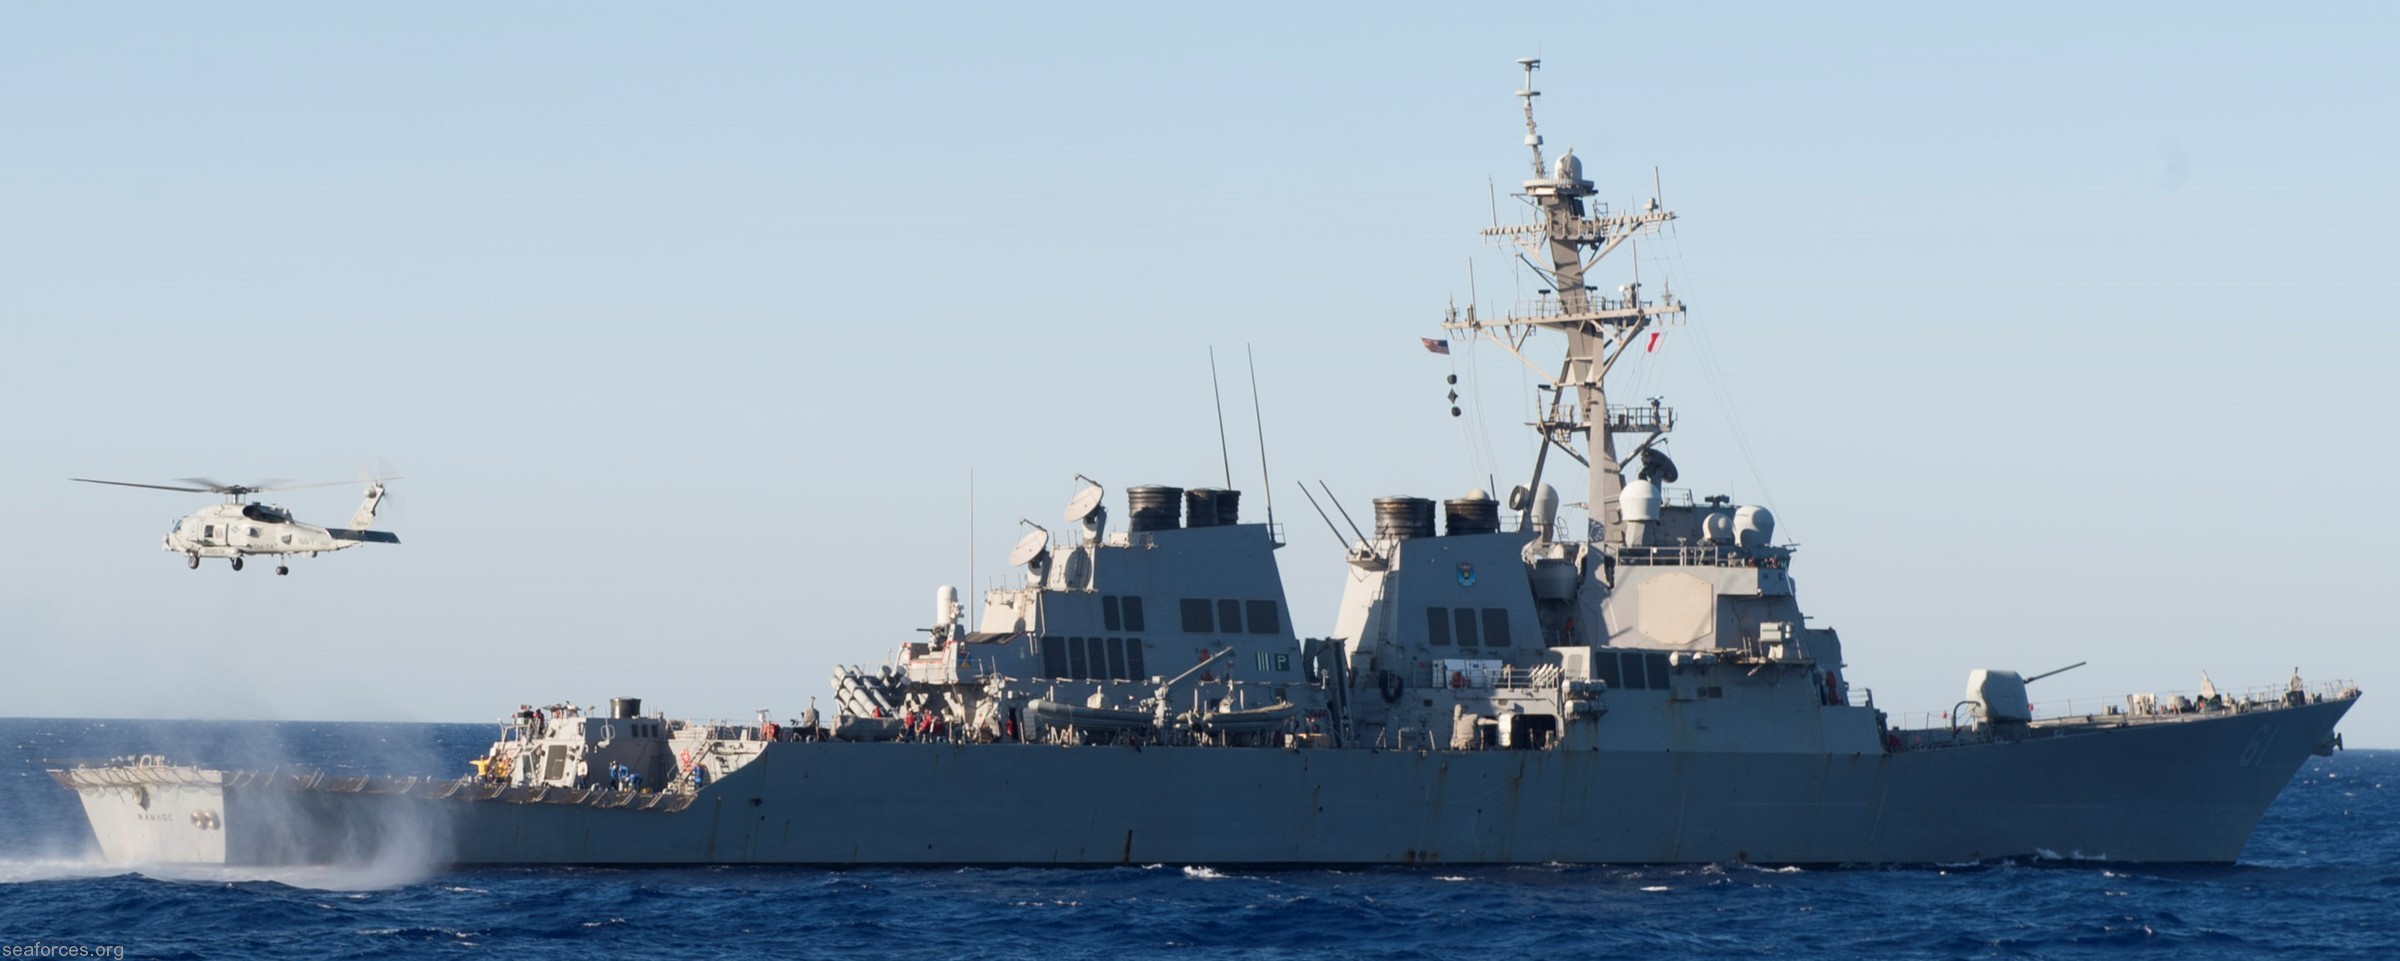 ddg-61 uss ramage guided missile destroyer us navy 30